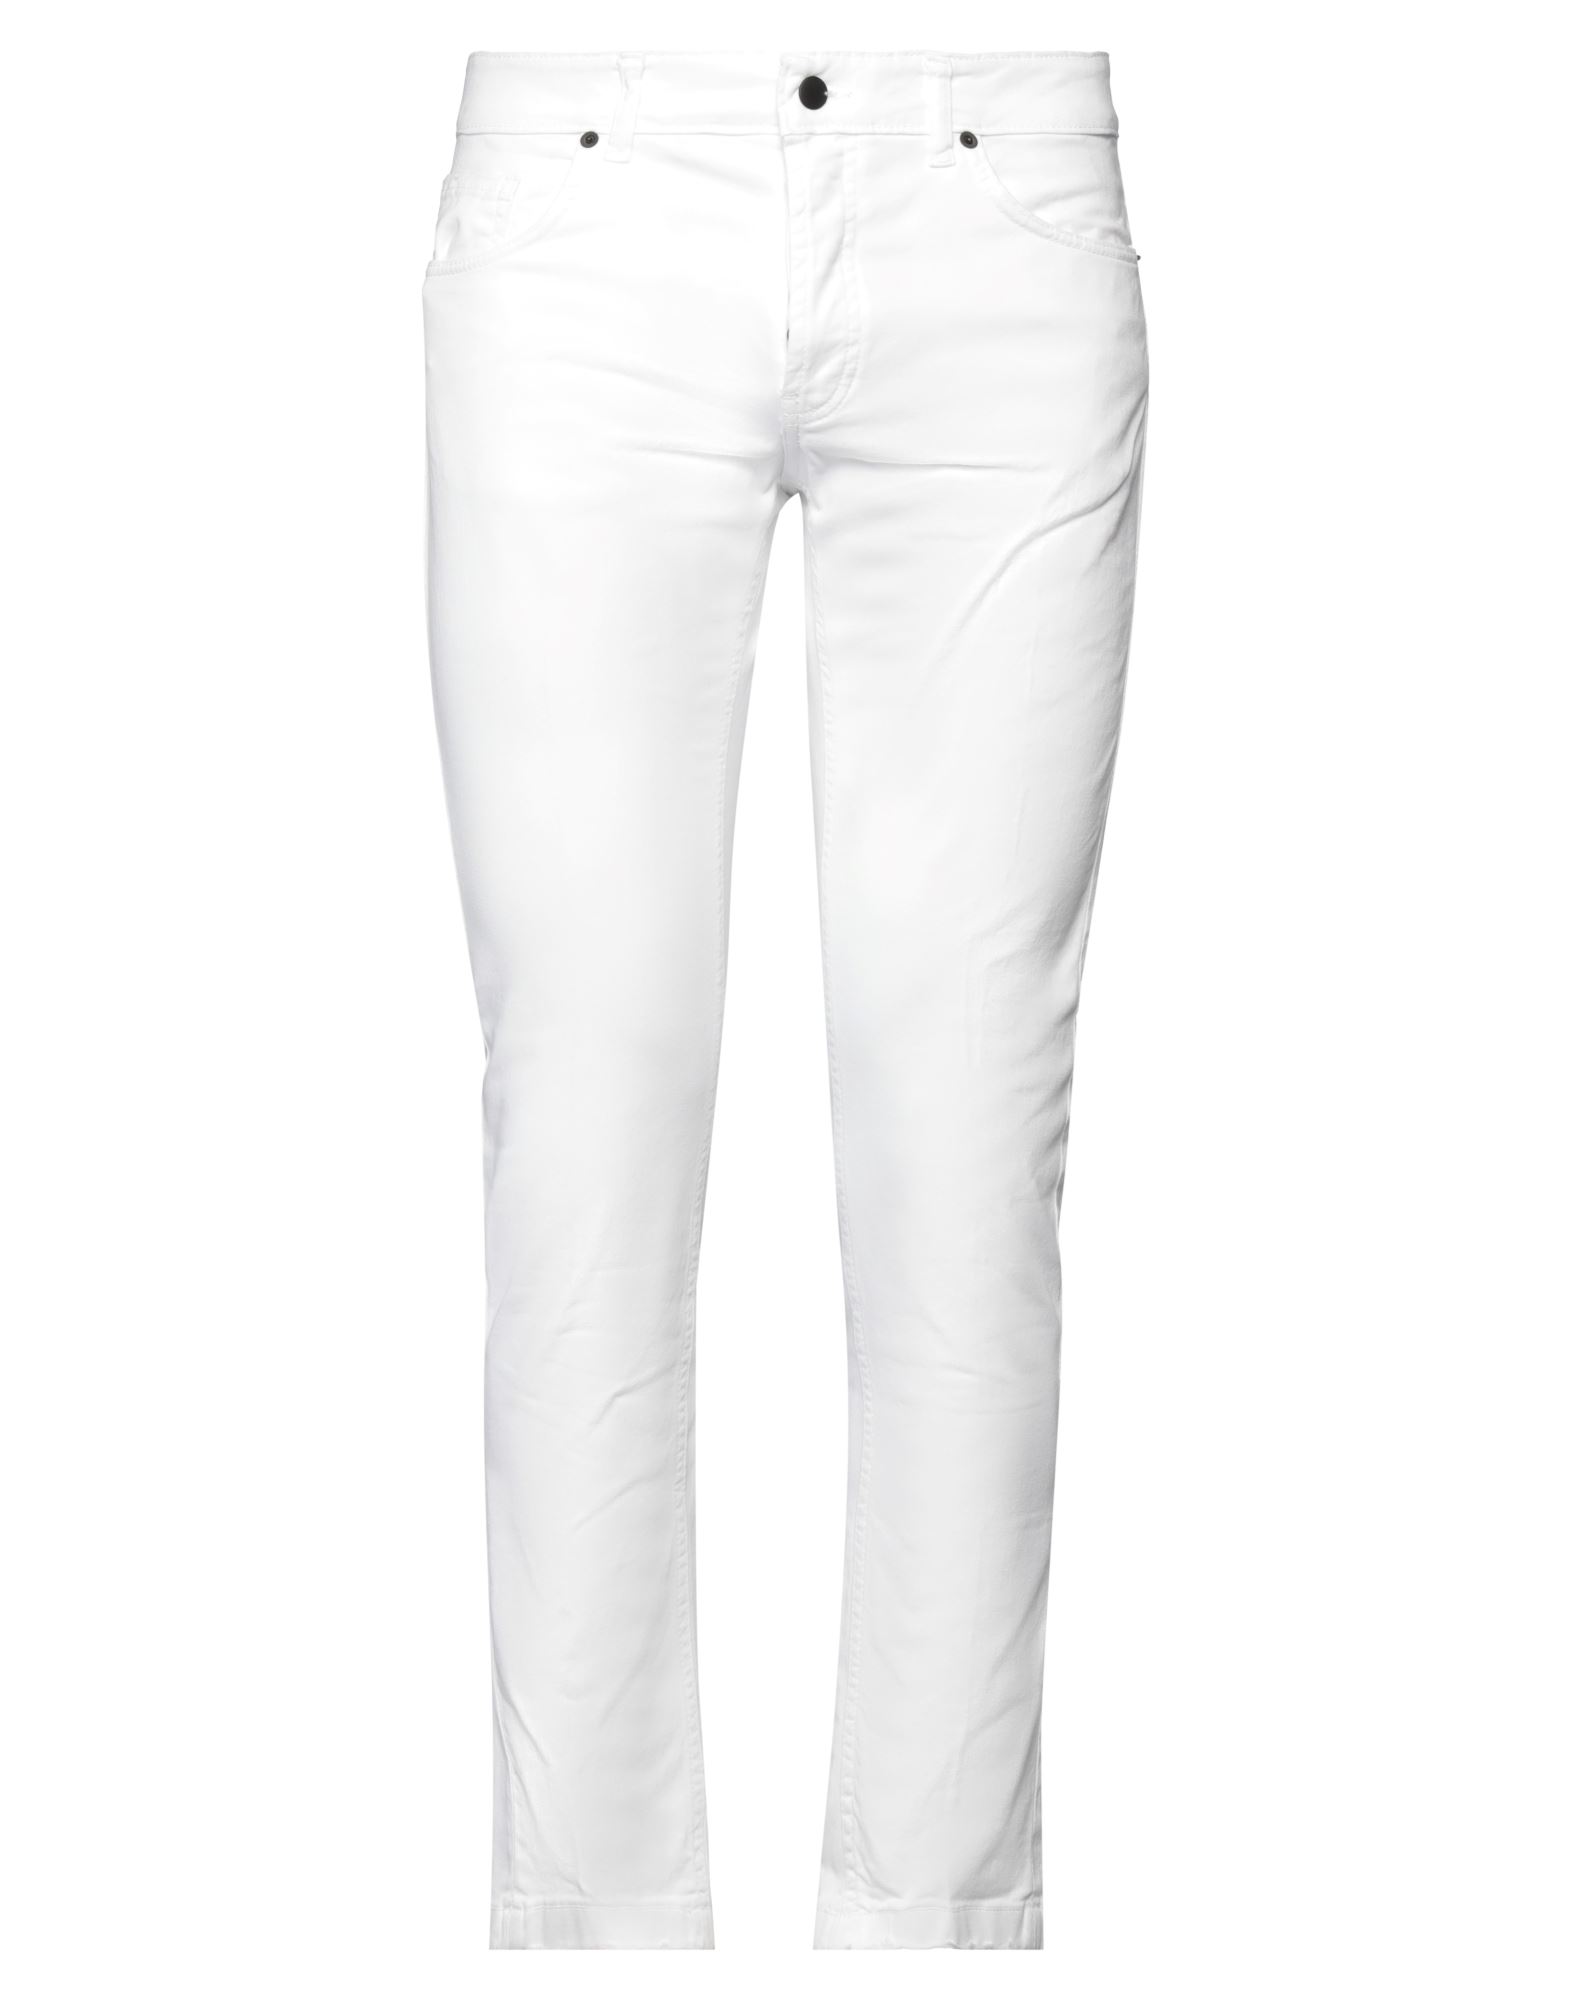 Addiction Italian Couture Pants In White